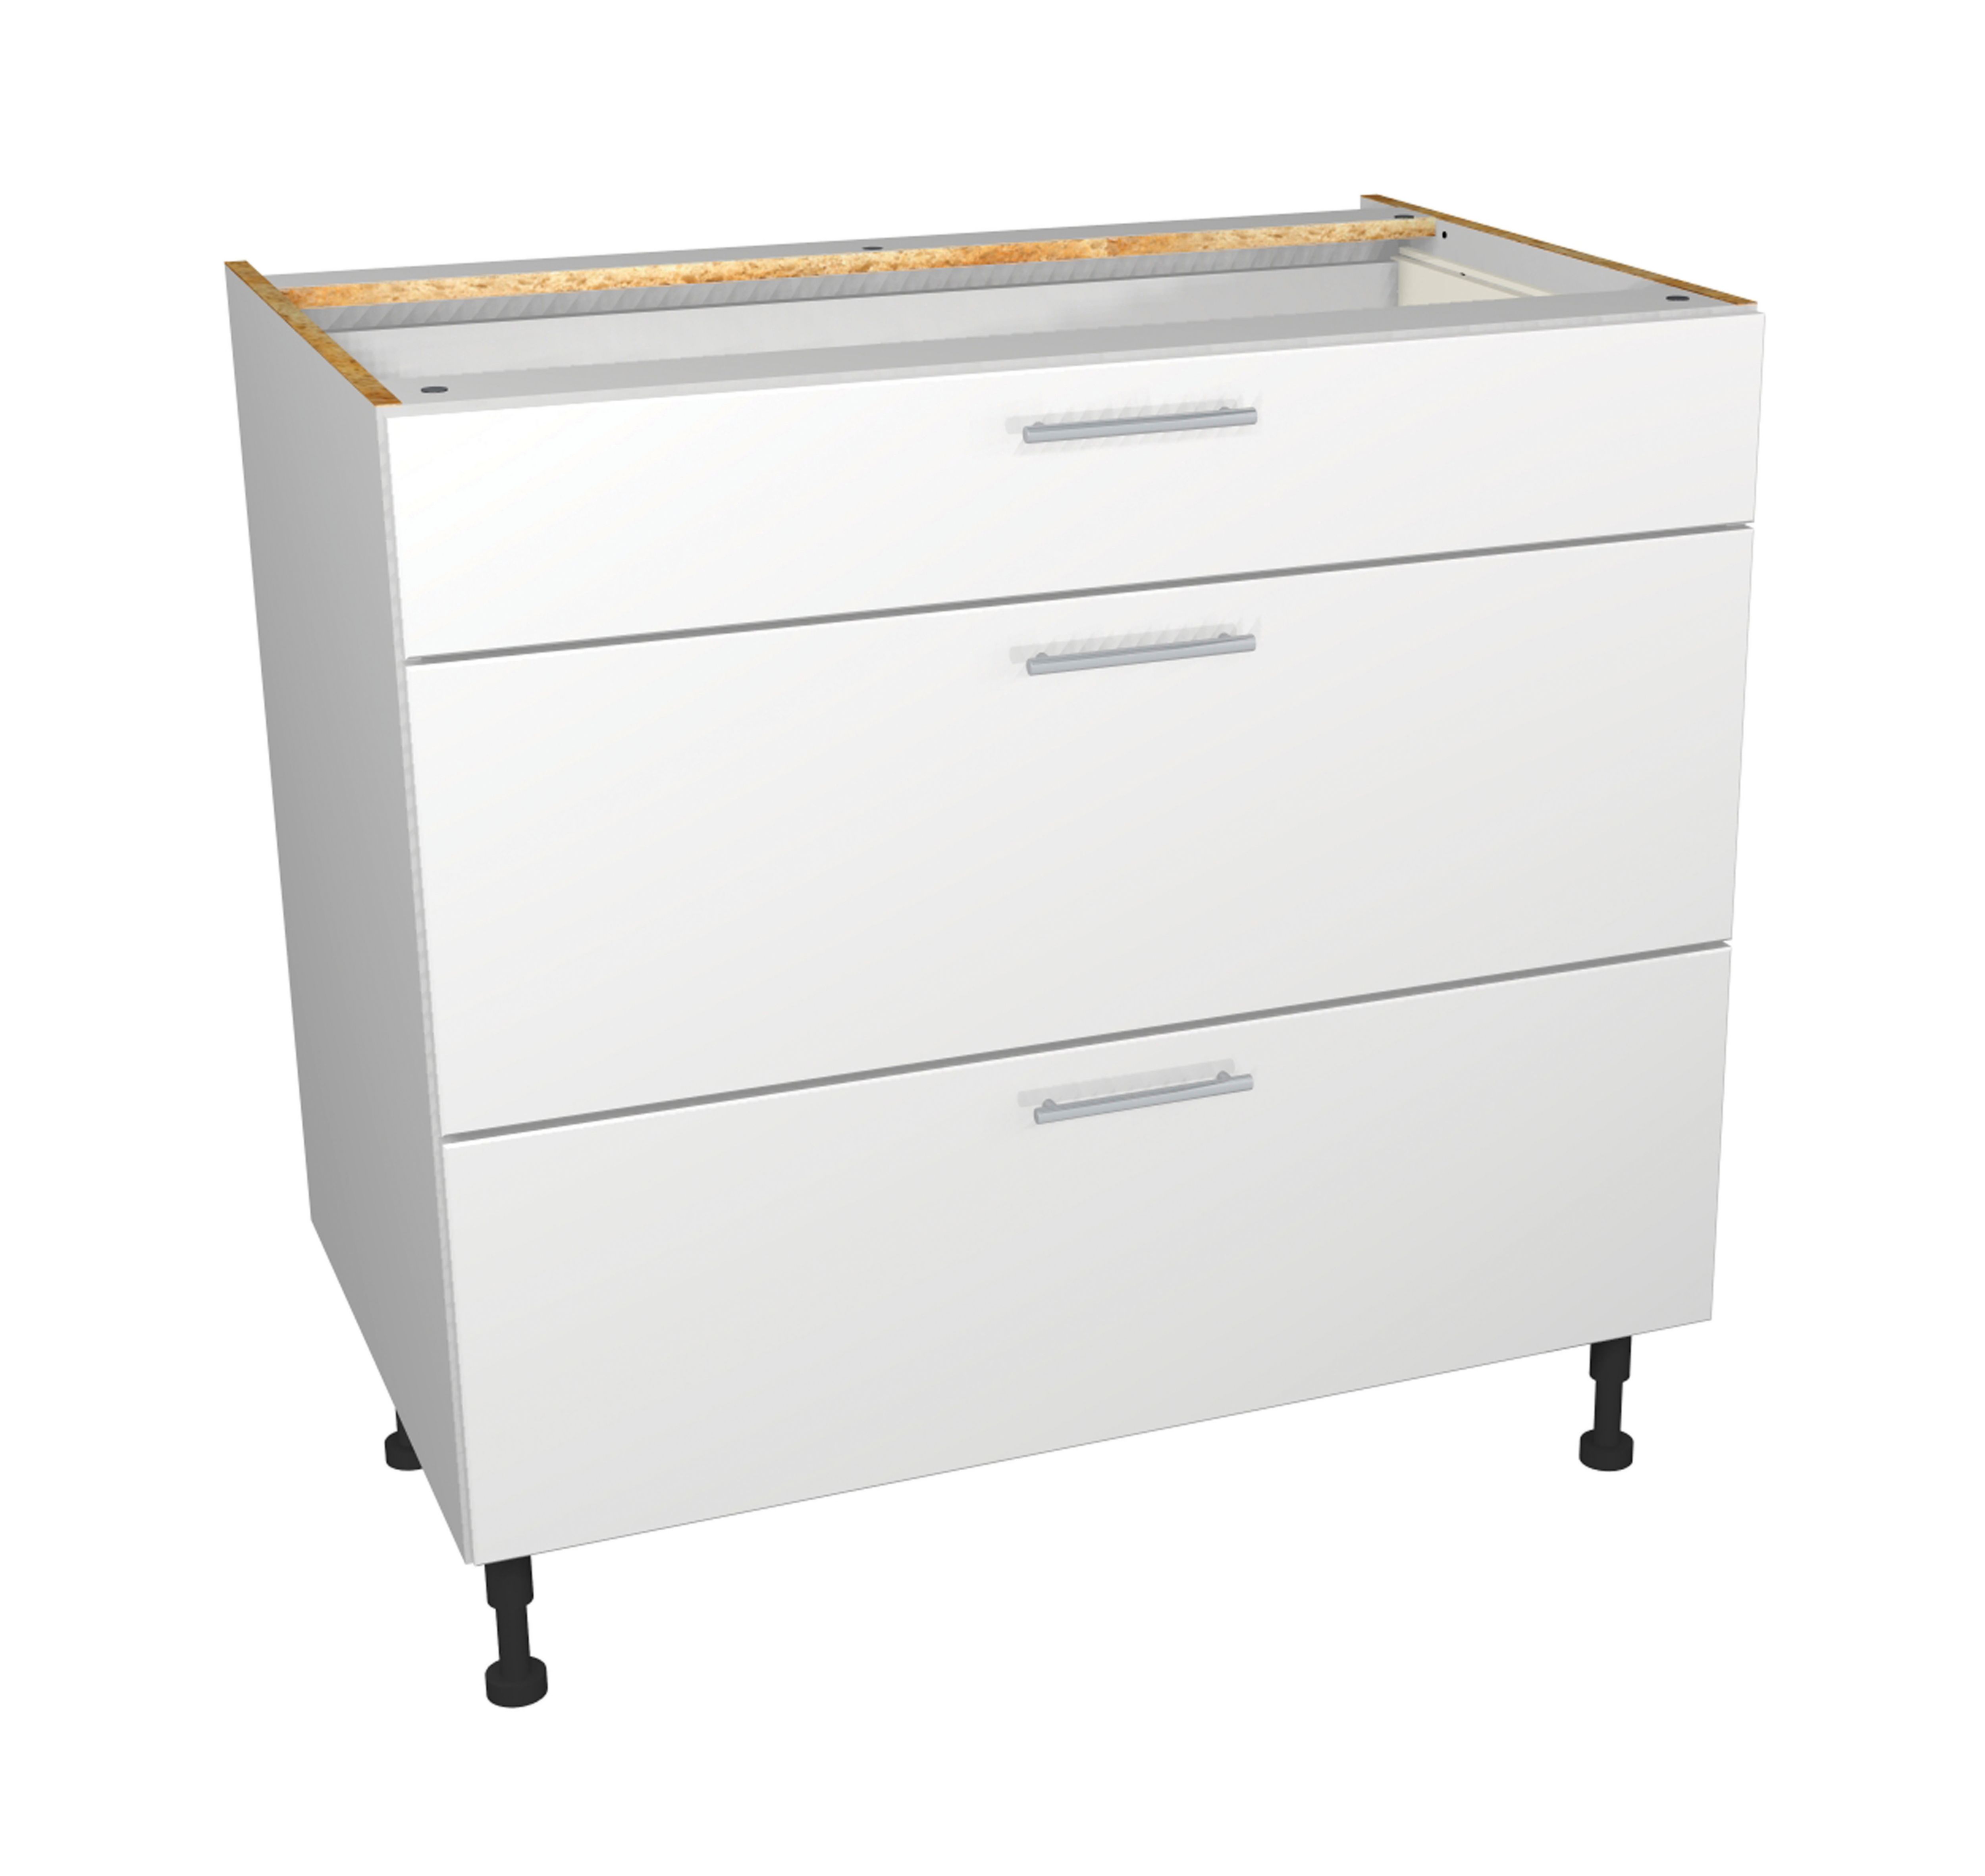 Image of Wickes Orlando White Gloss Slab Drawer Unit - 900mm Part 1 of 2